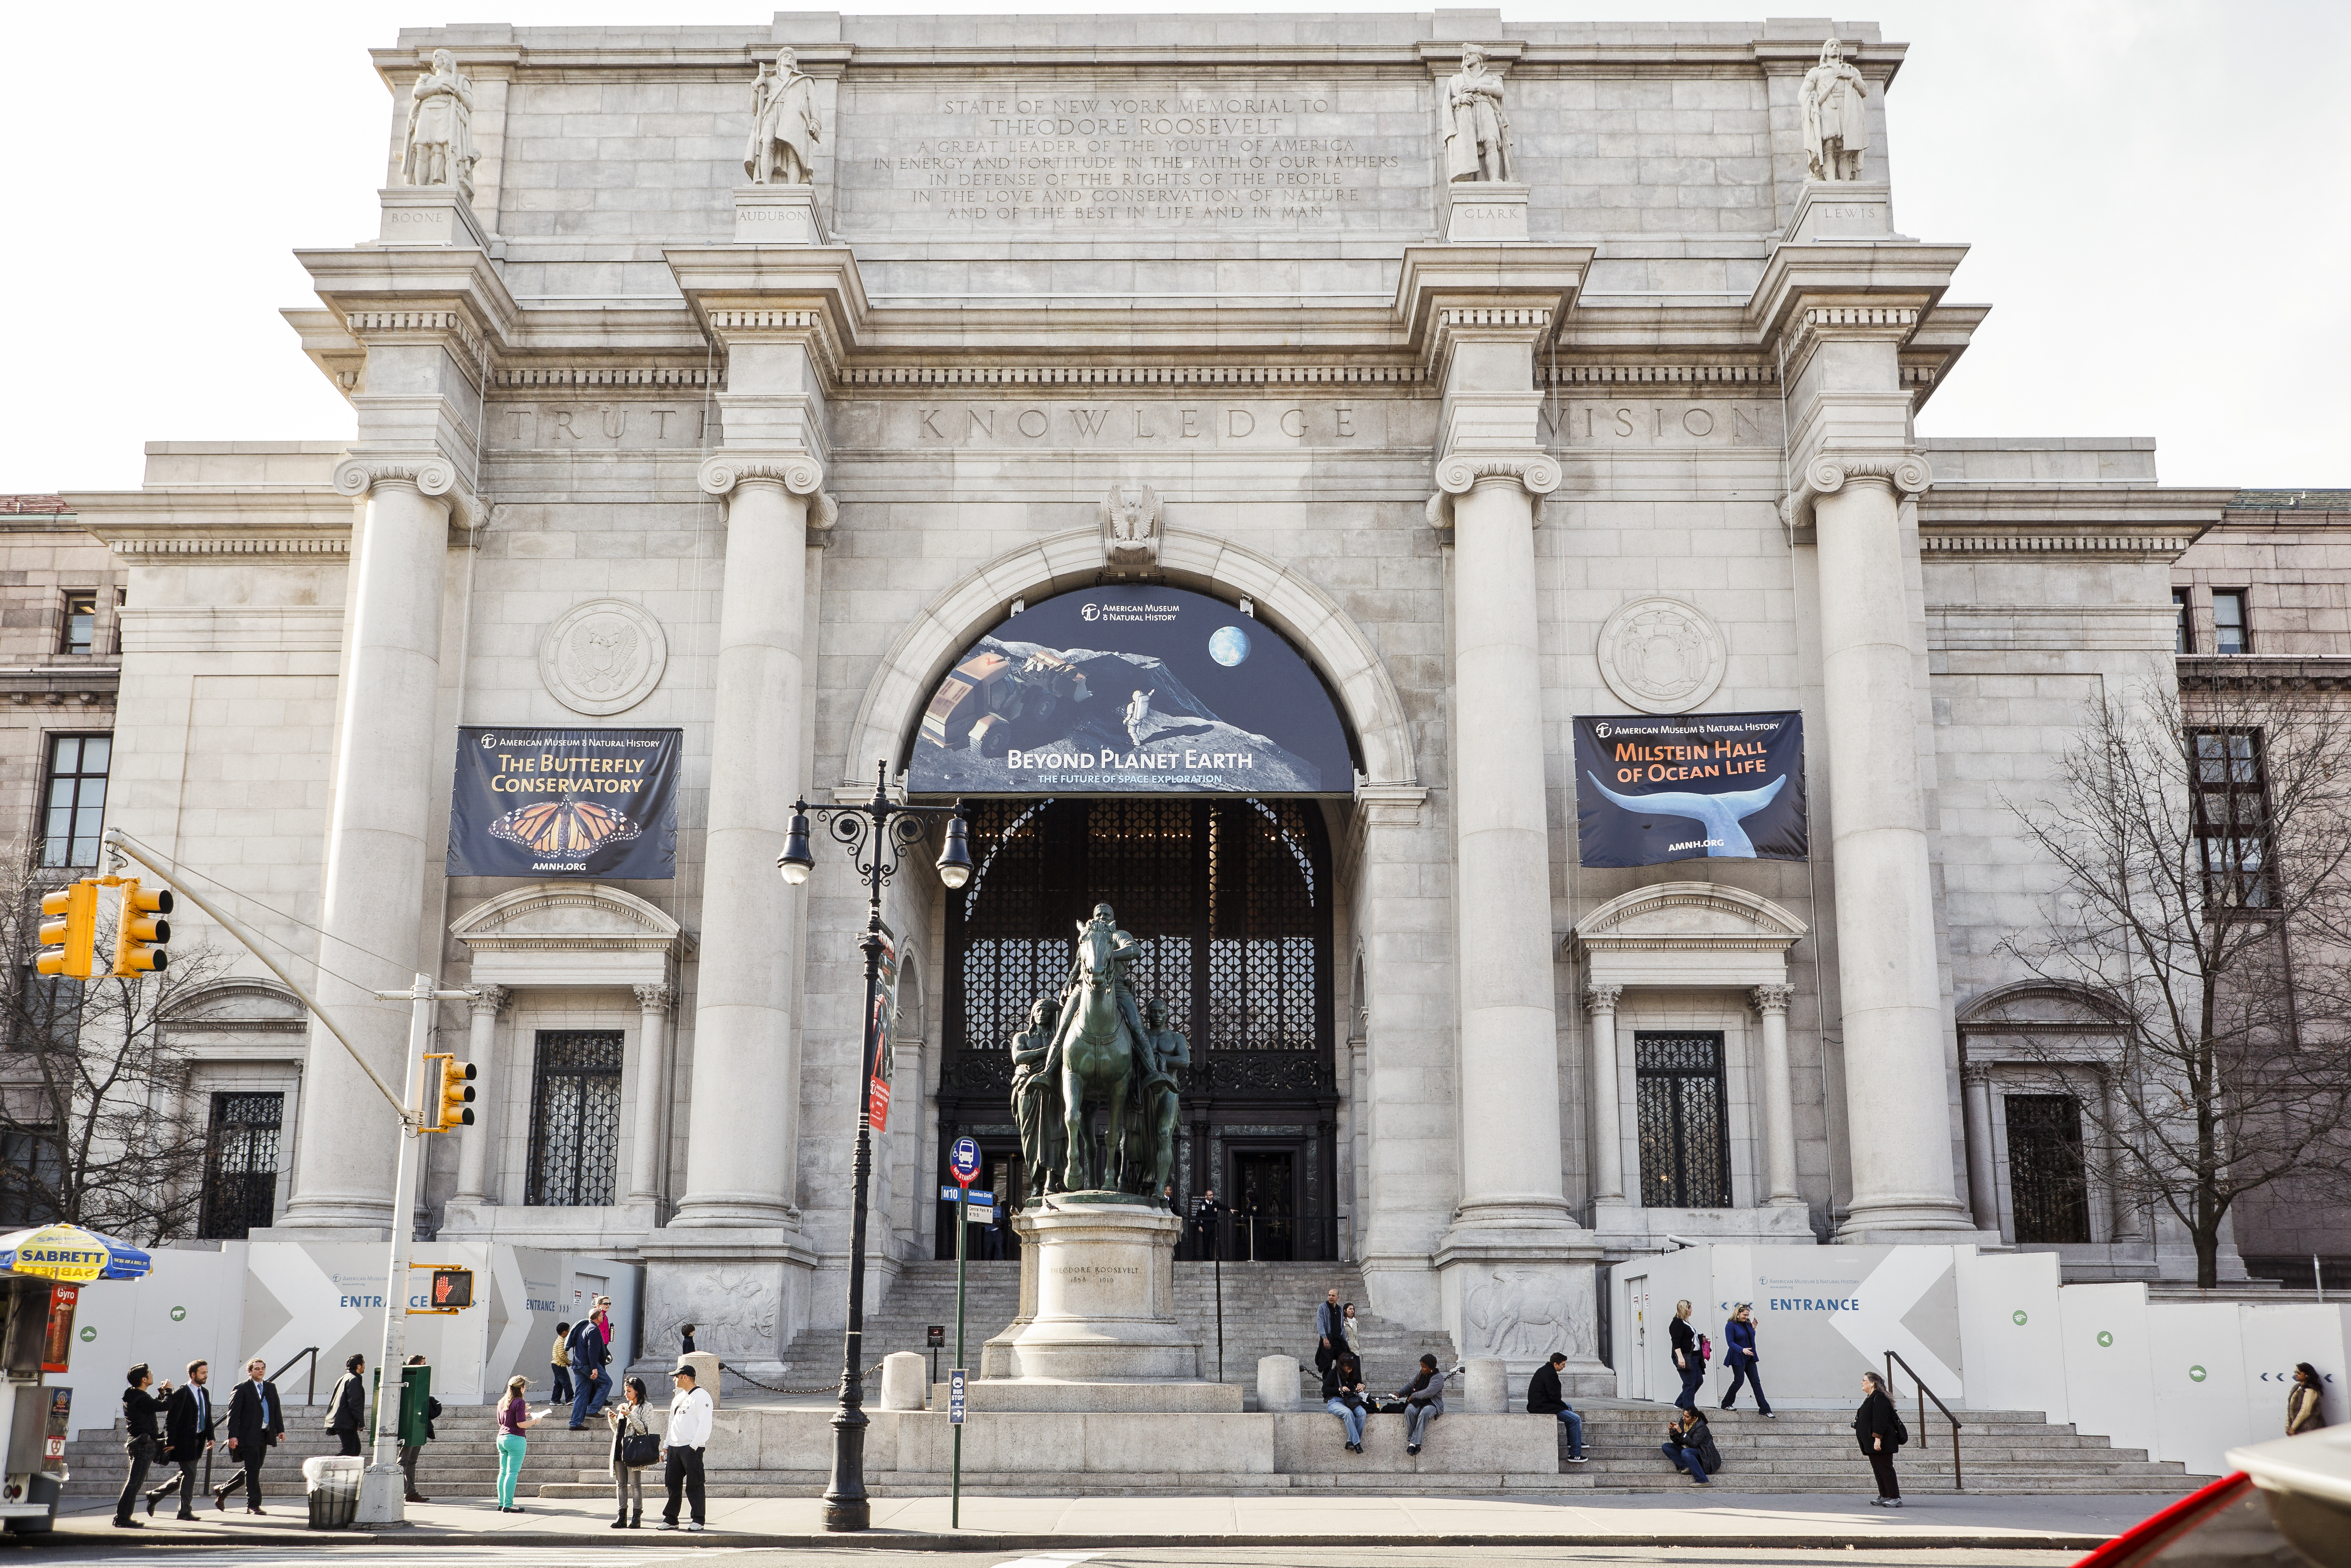 The exterior of the American Museum of Natural History. The facade is white with columns. 